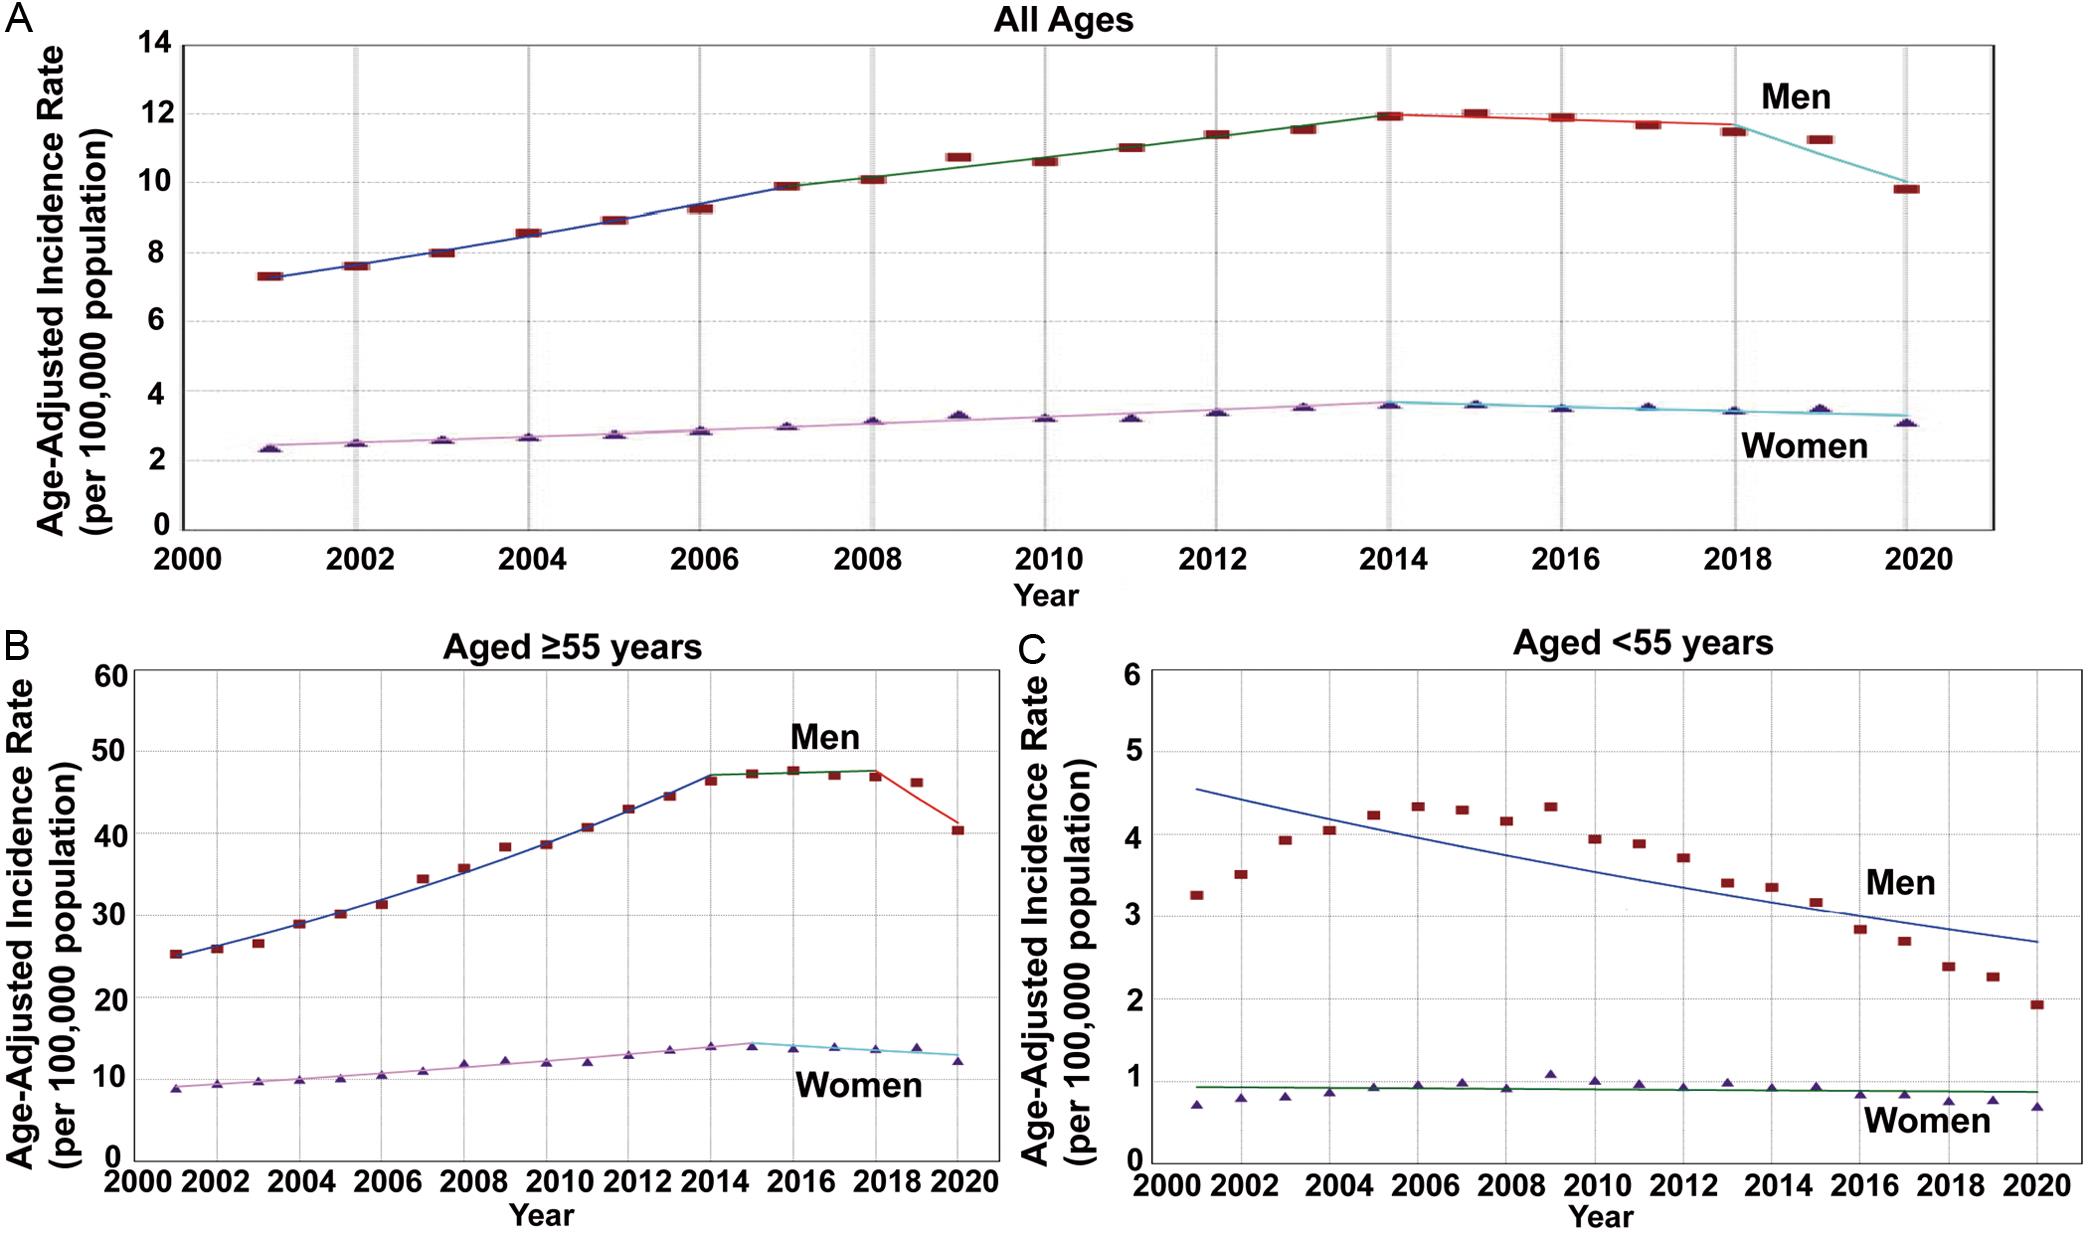 Sex-specific trends and age-adjusted incidence rates per 100,000 population for Hepatocellular Carcinoma (HCC) among different age groups.